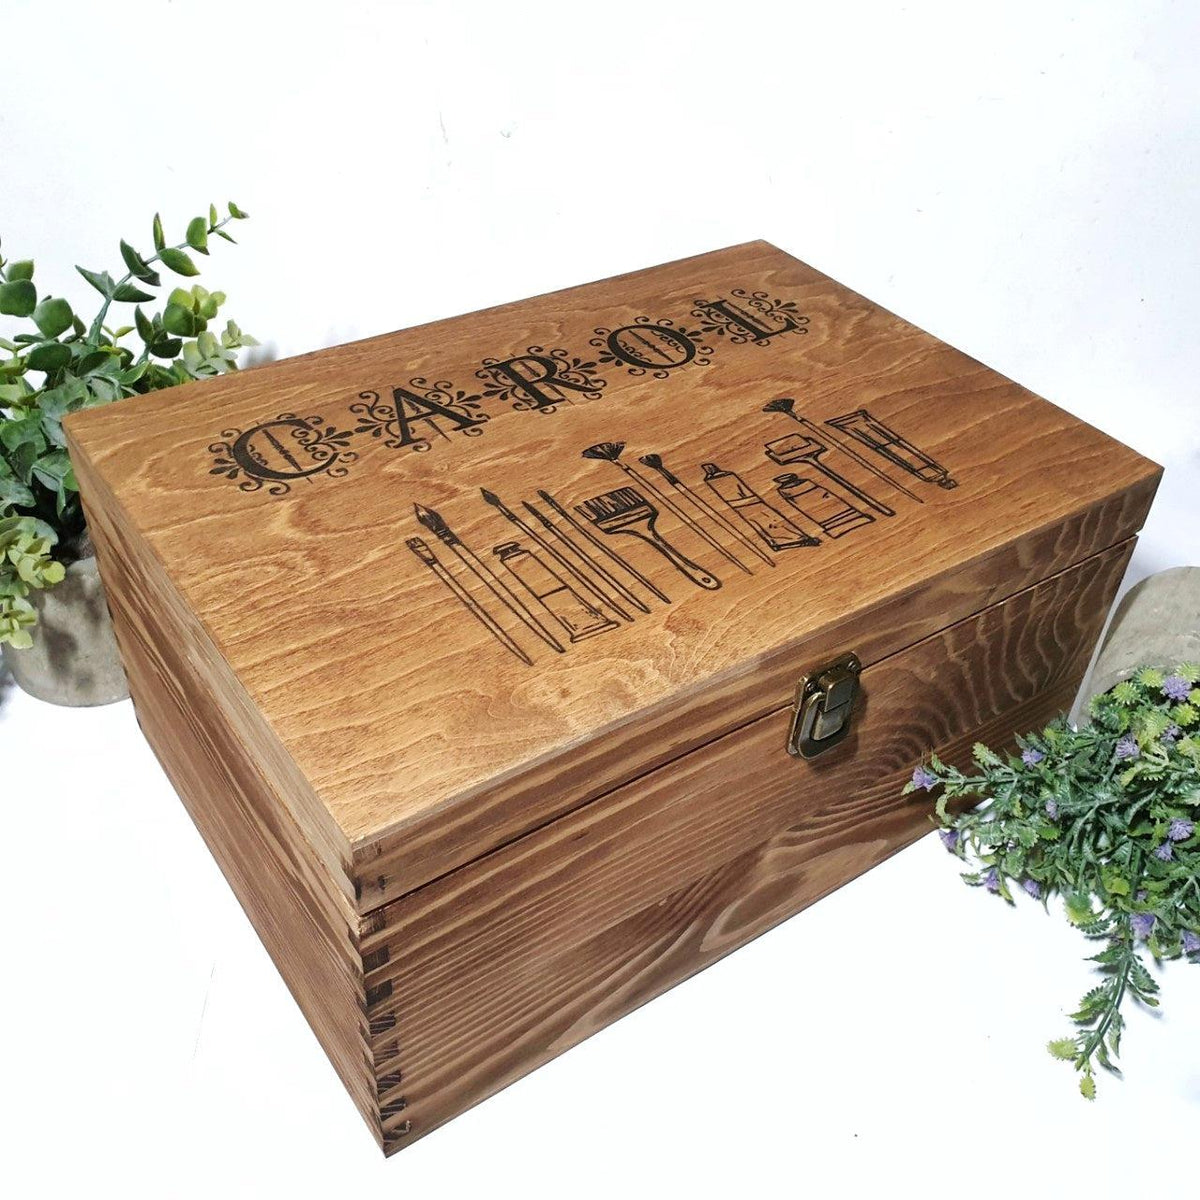 Personalised Art Box With Engraved Message, Gift Idea for Art Lovers,  Artists for Storing Paintbrushes or Pencils. 2 Sizes 